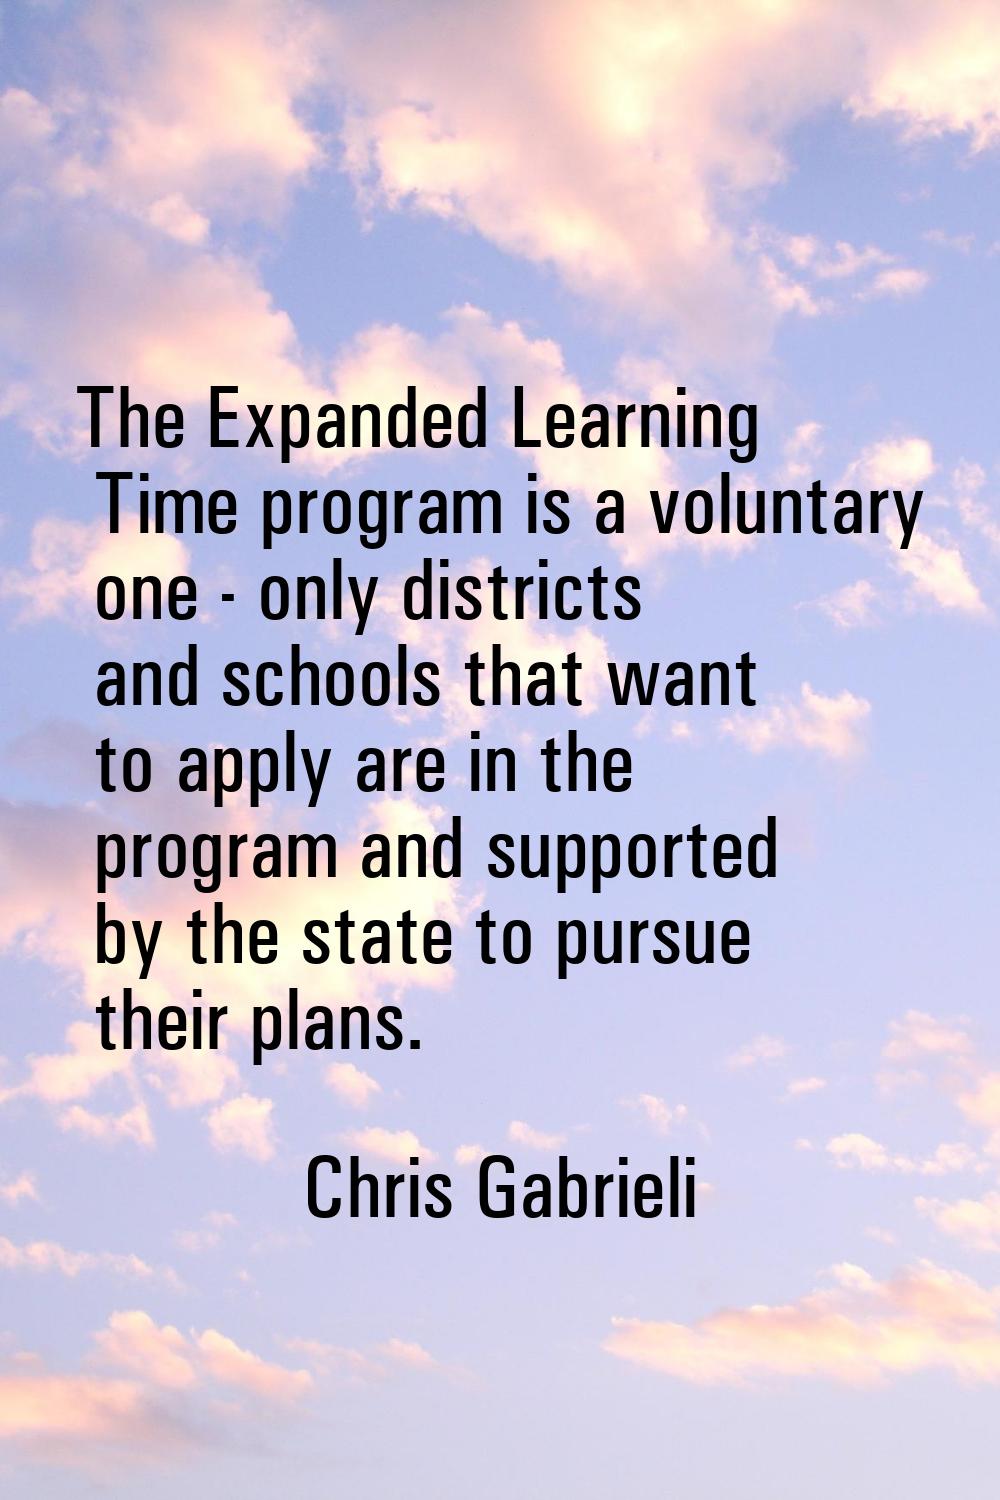 The Expanded Learning Time program is a voluntary one - only districts and schools that want to app